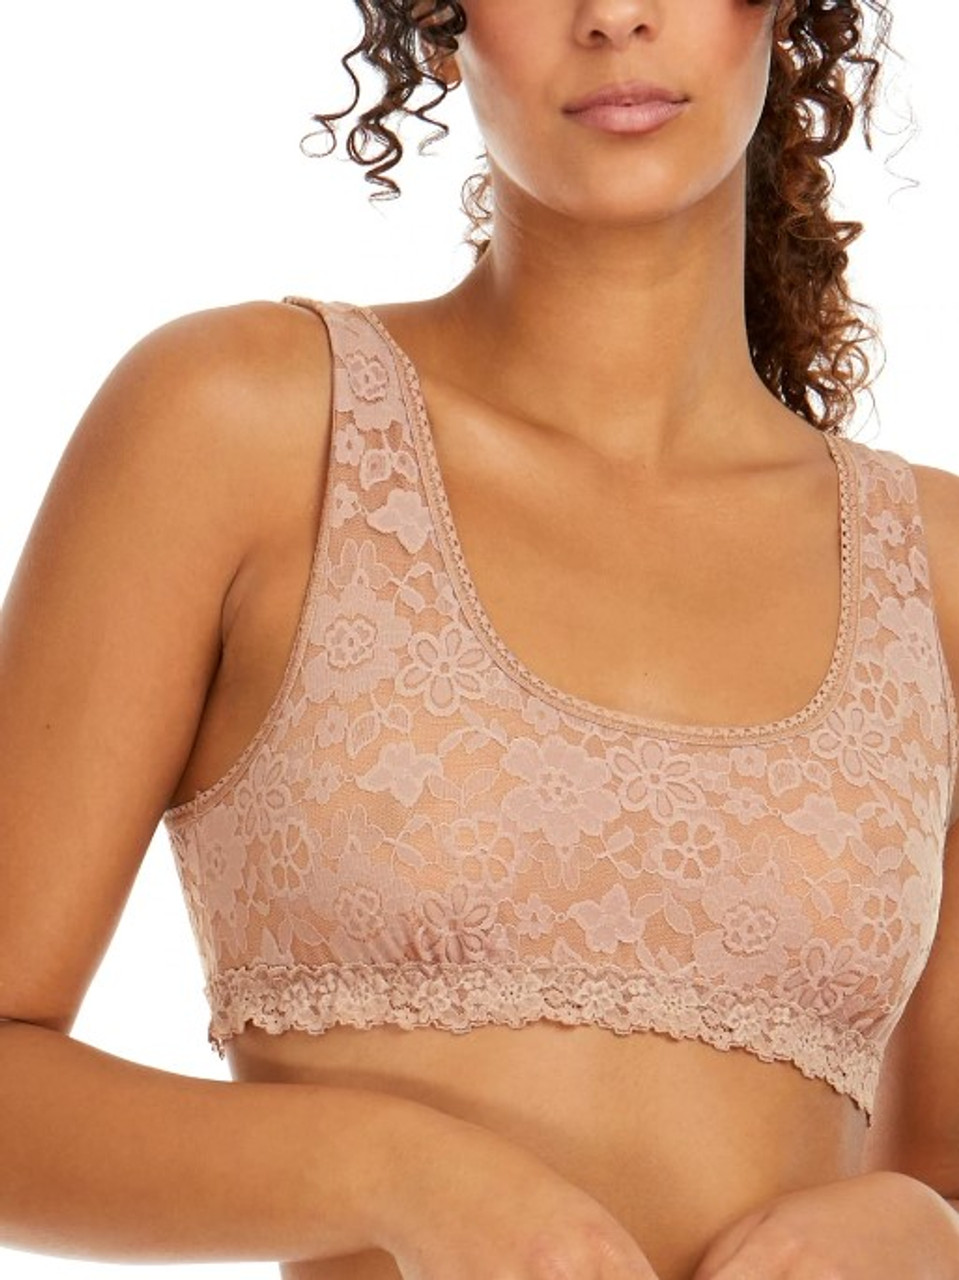 https://cdn11.bigcommerce.com/s-9wrbe9hiua/images/stencil/1280x1280/products/5404/5998/Daily-Lace-Scoop-Bralette-Nude-1__80462.1654125849.jpg?c=1